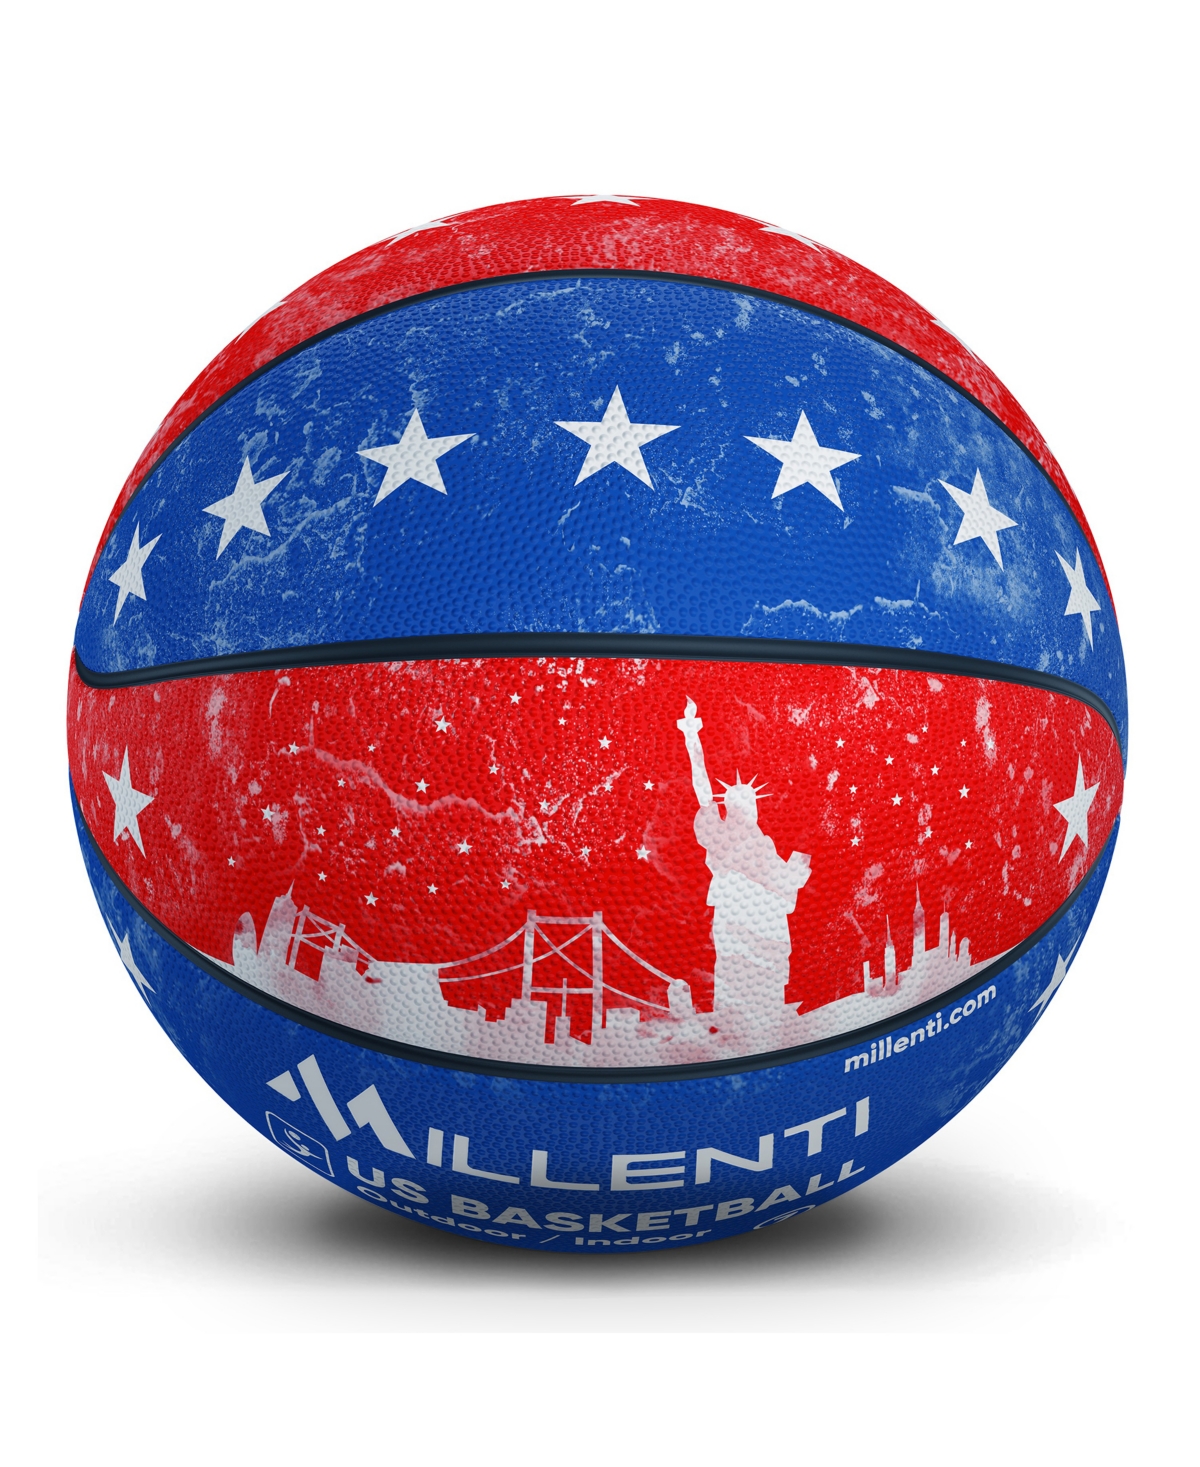 Millenti Basketball Official Size 7 Outdoor Indoor Ball Vintage Like Usa Stars And Stripes Design Adult Sized In Red/white/blue